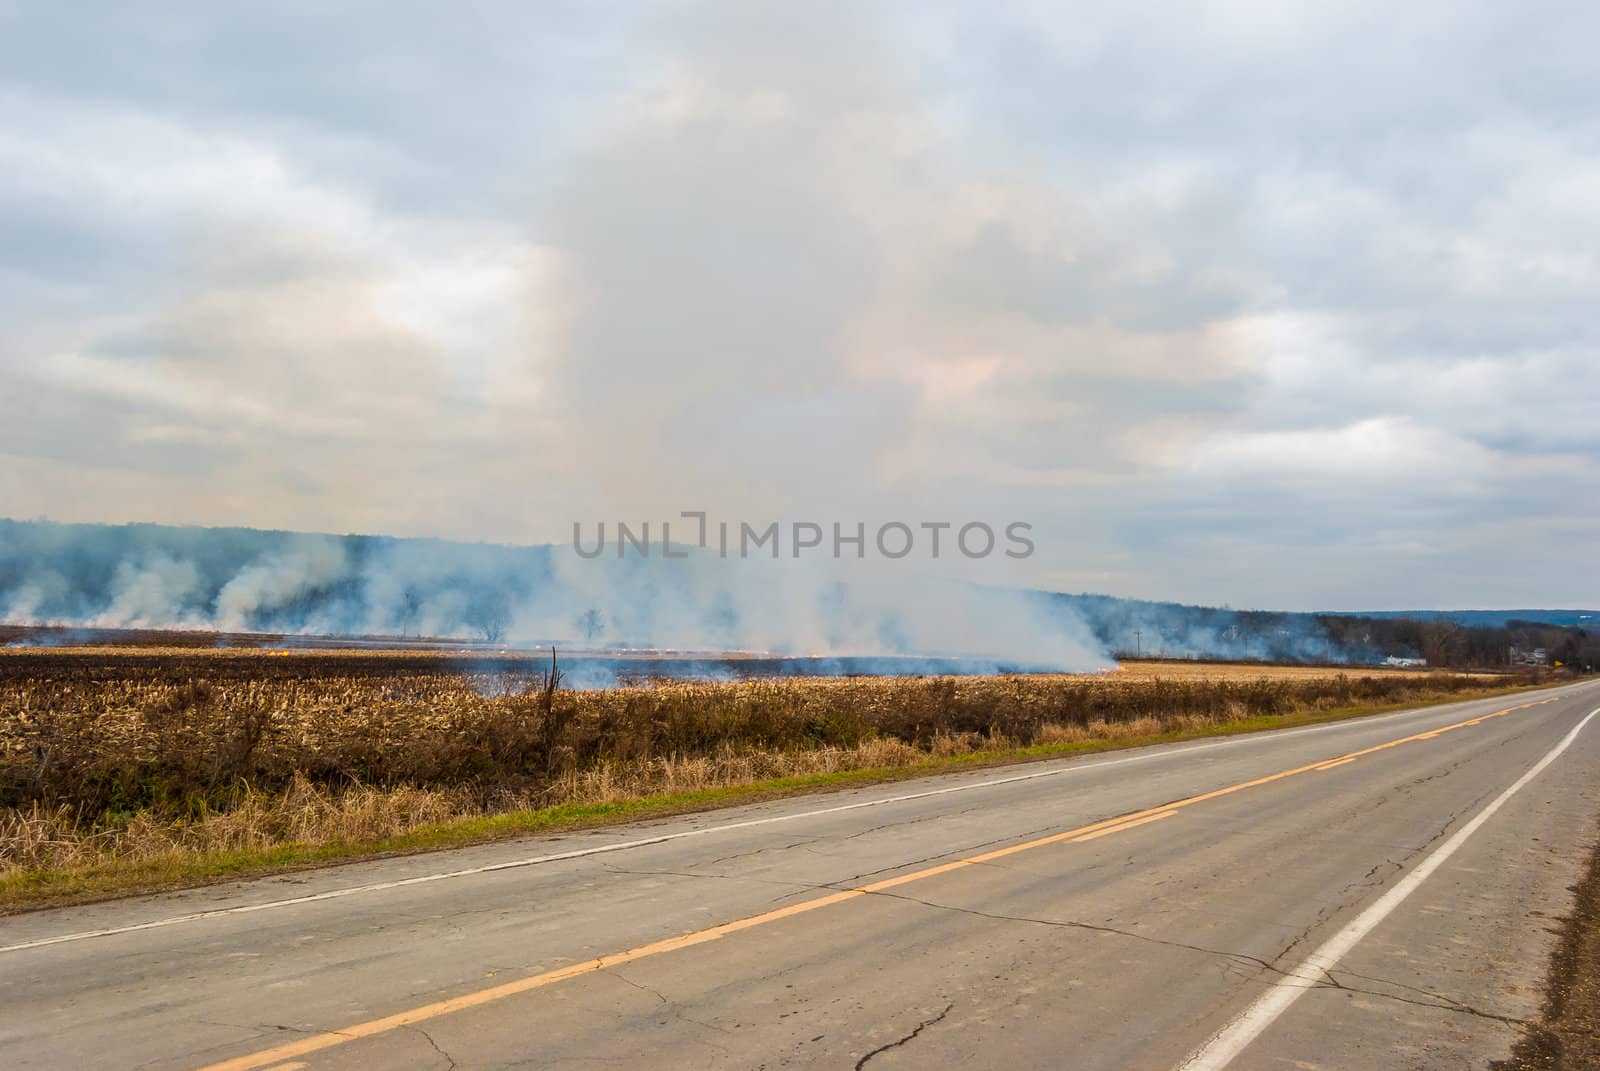 Photograph of a controlled agricultural burn set to clear a field after the crops had been harvested.